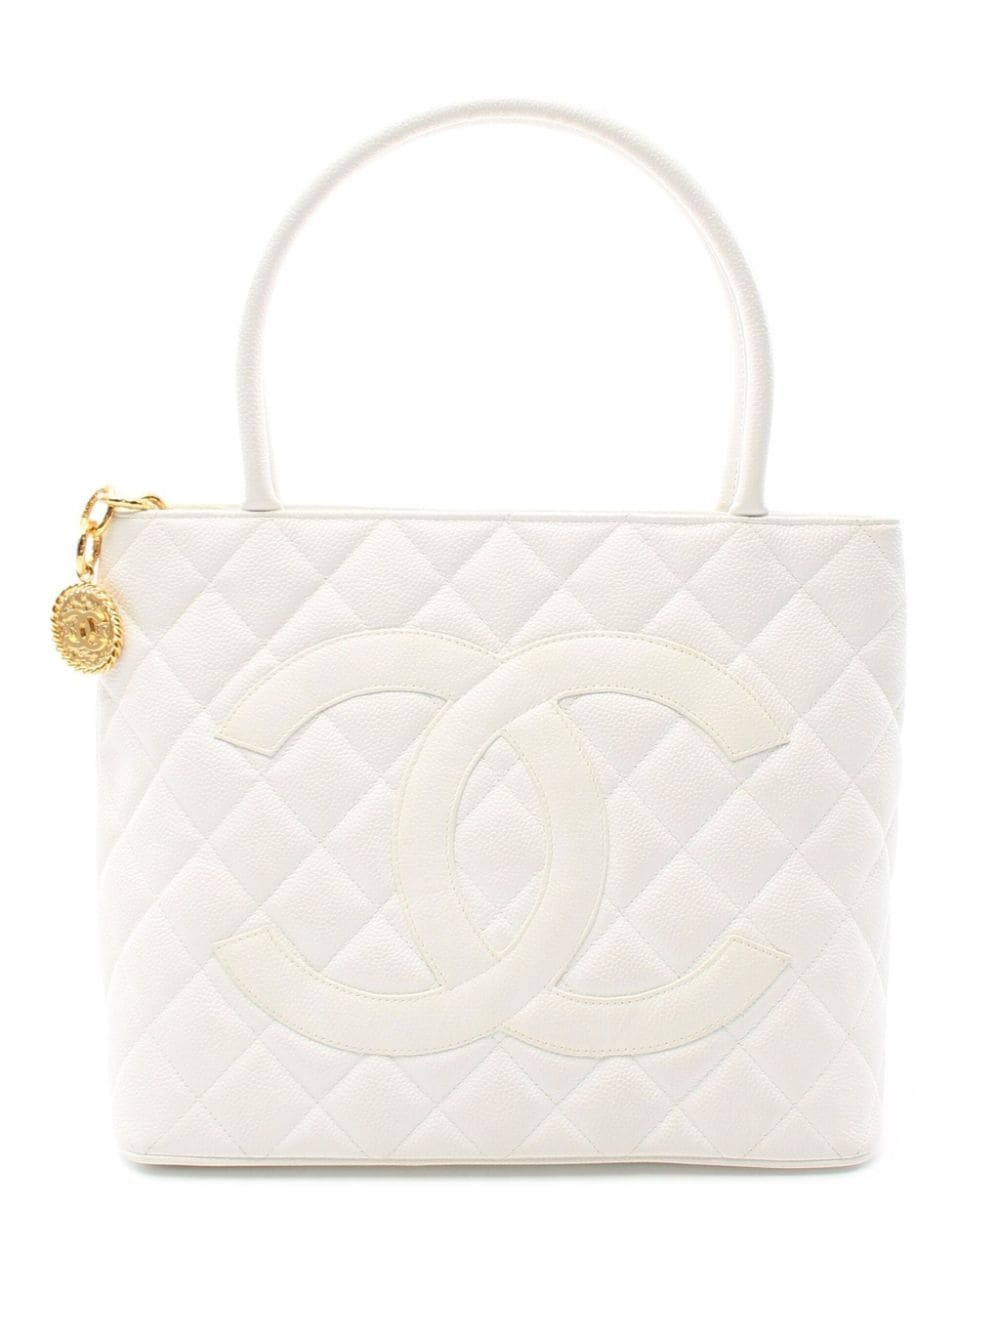 CHANEL Pre-Owned 1997-1999 Medallion Tote Bag - Farfetch